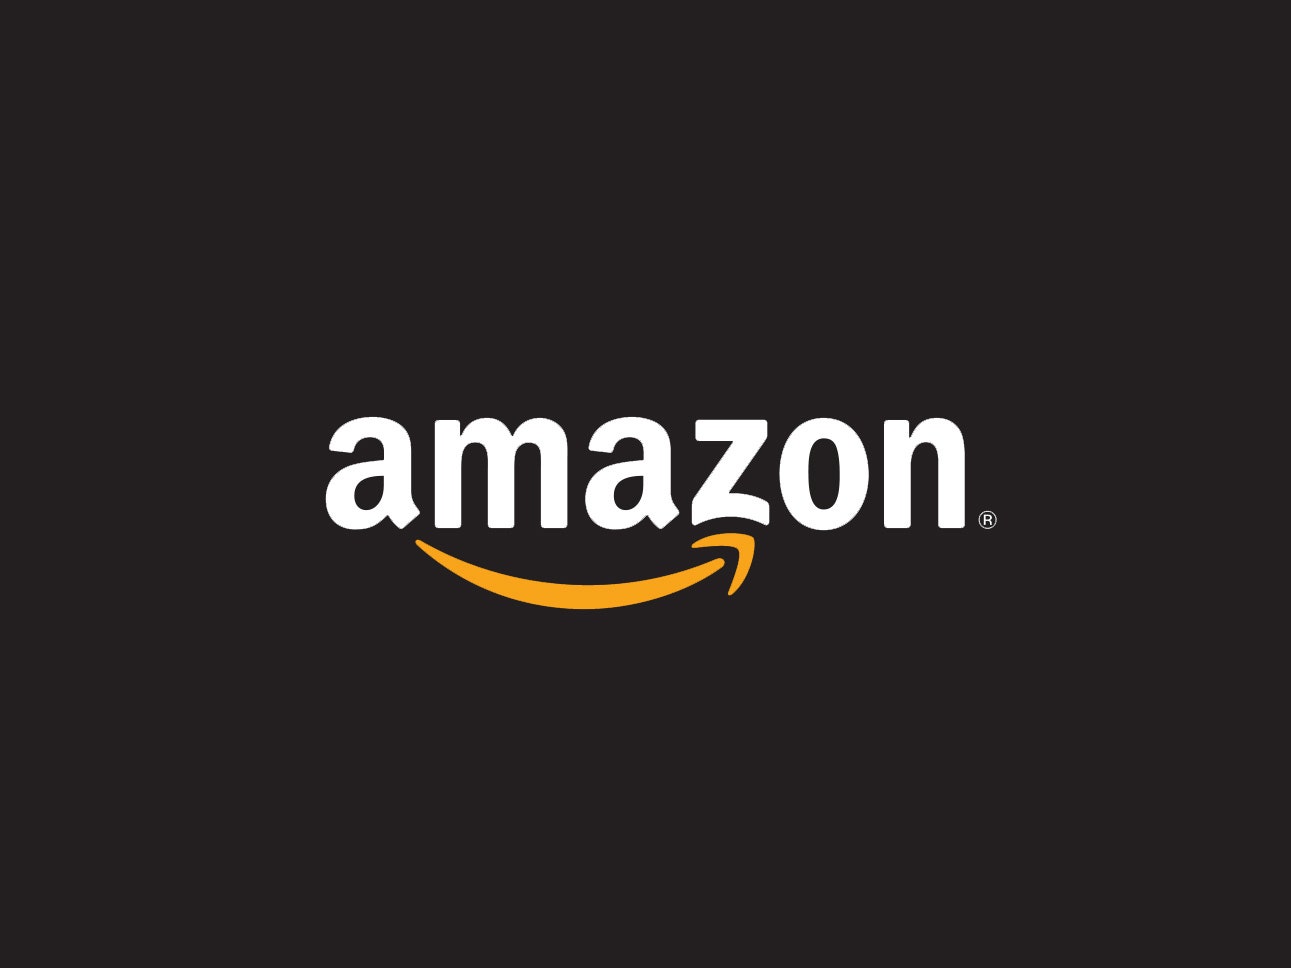 A Trial Deposit has been Successfully made to your Amazon Credit Builder